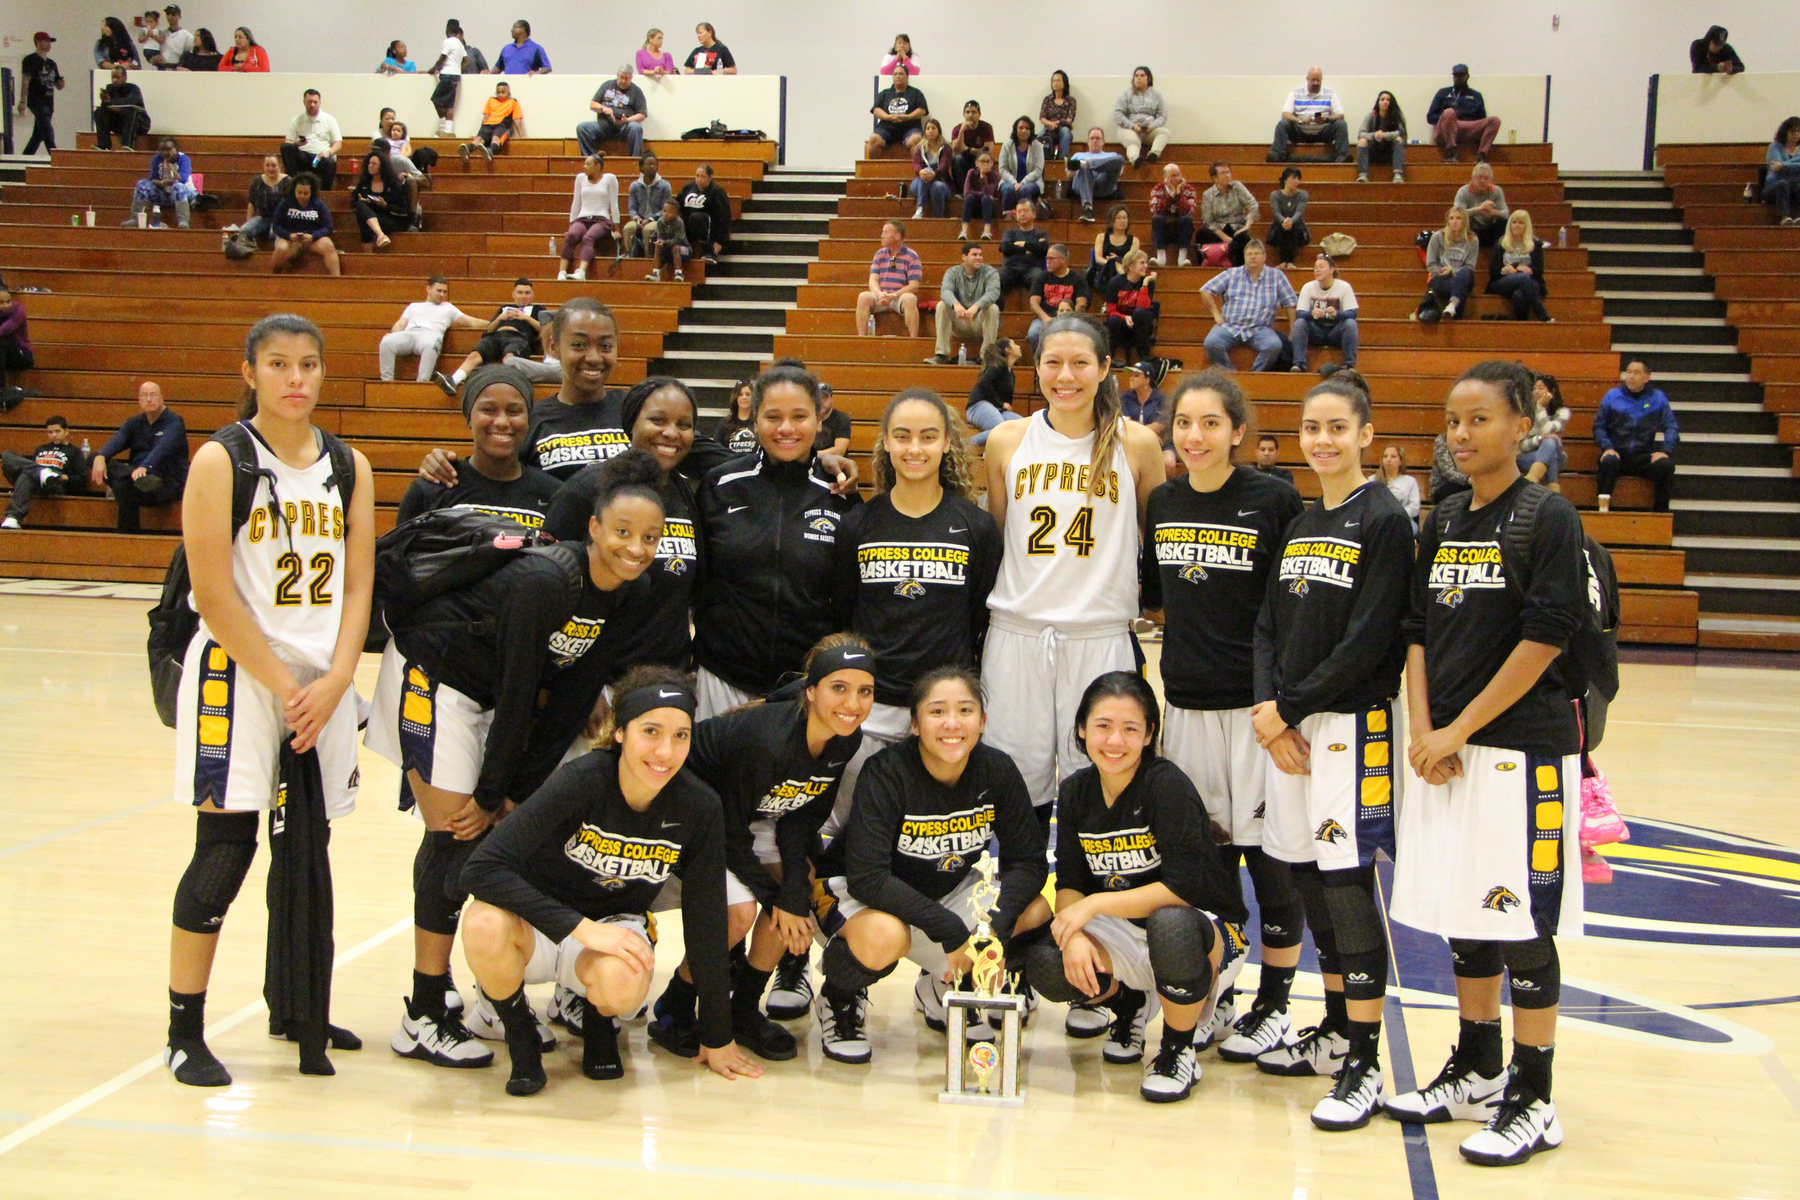 Women's Basketball Takes 3rd Place at 33rd Annual Lady Charger Classic